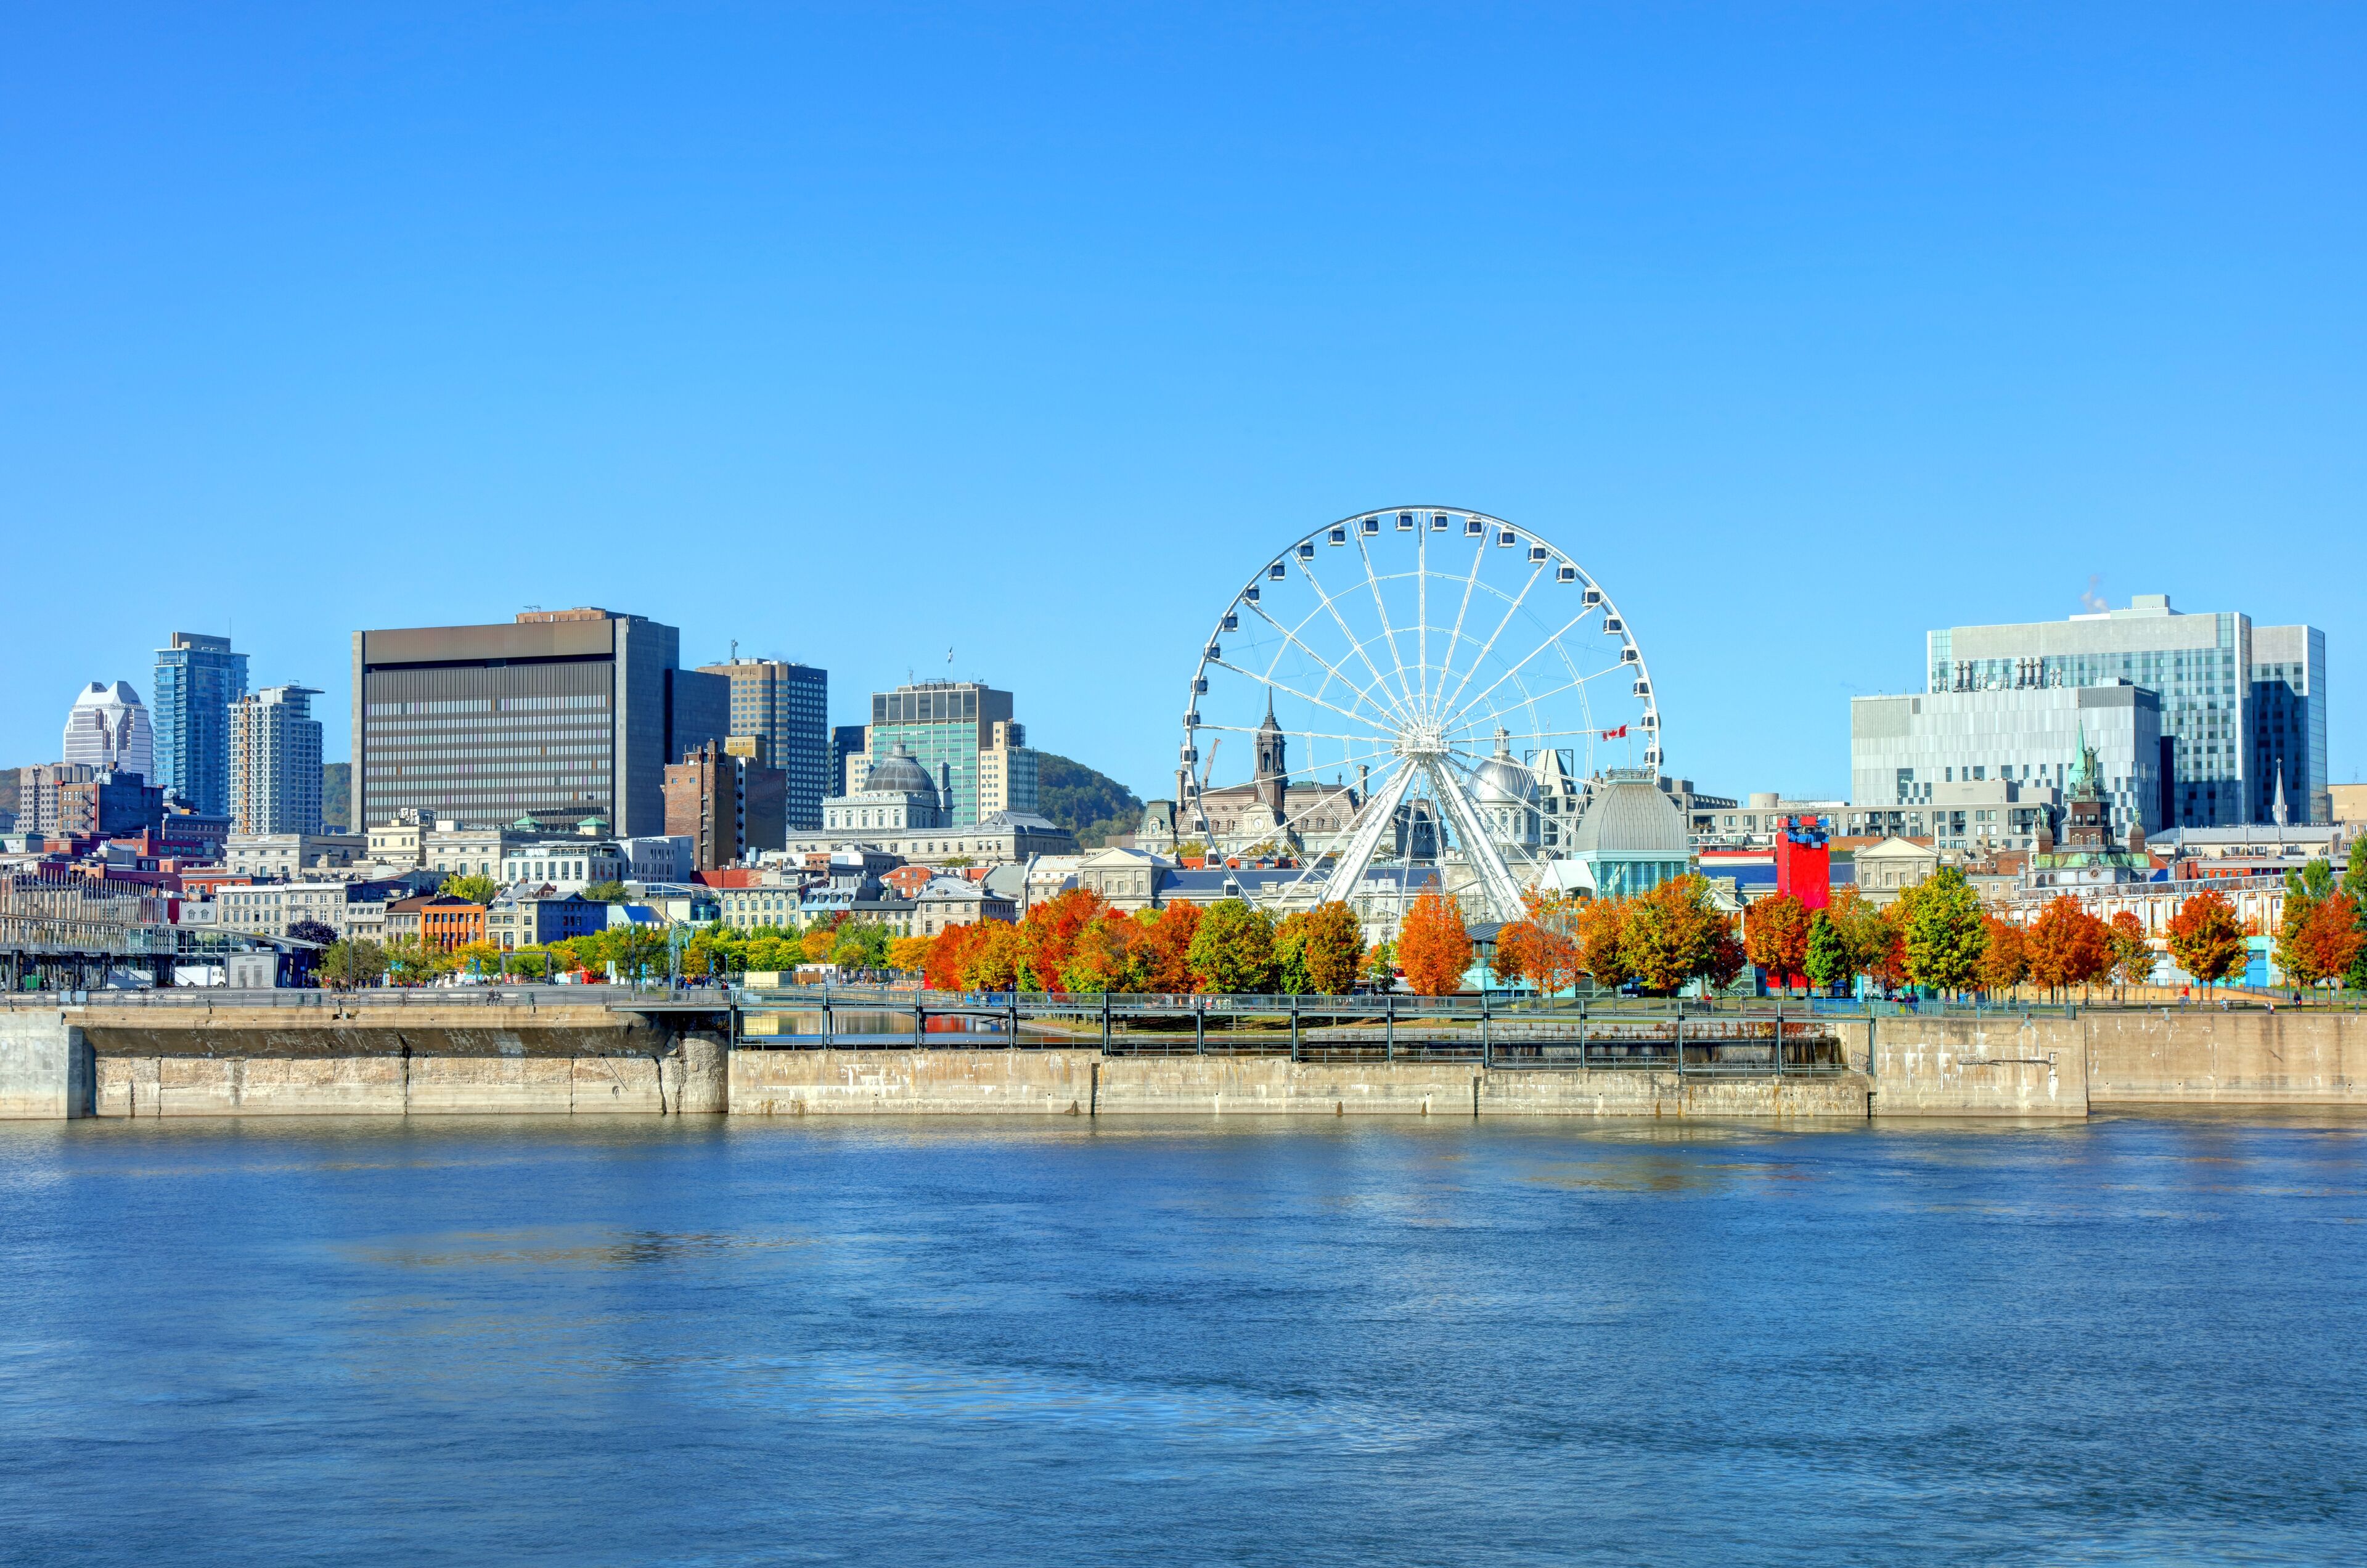 View of Montreal harbour in autumn from the St. Lawrence River, with a view of the Ferris wheel ride and the city.